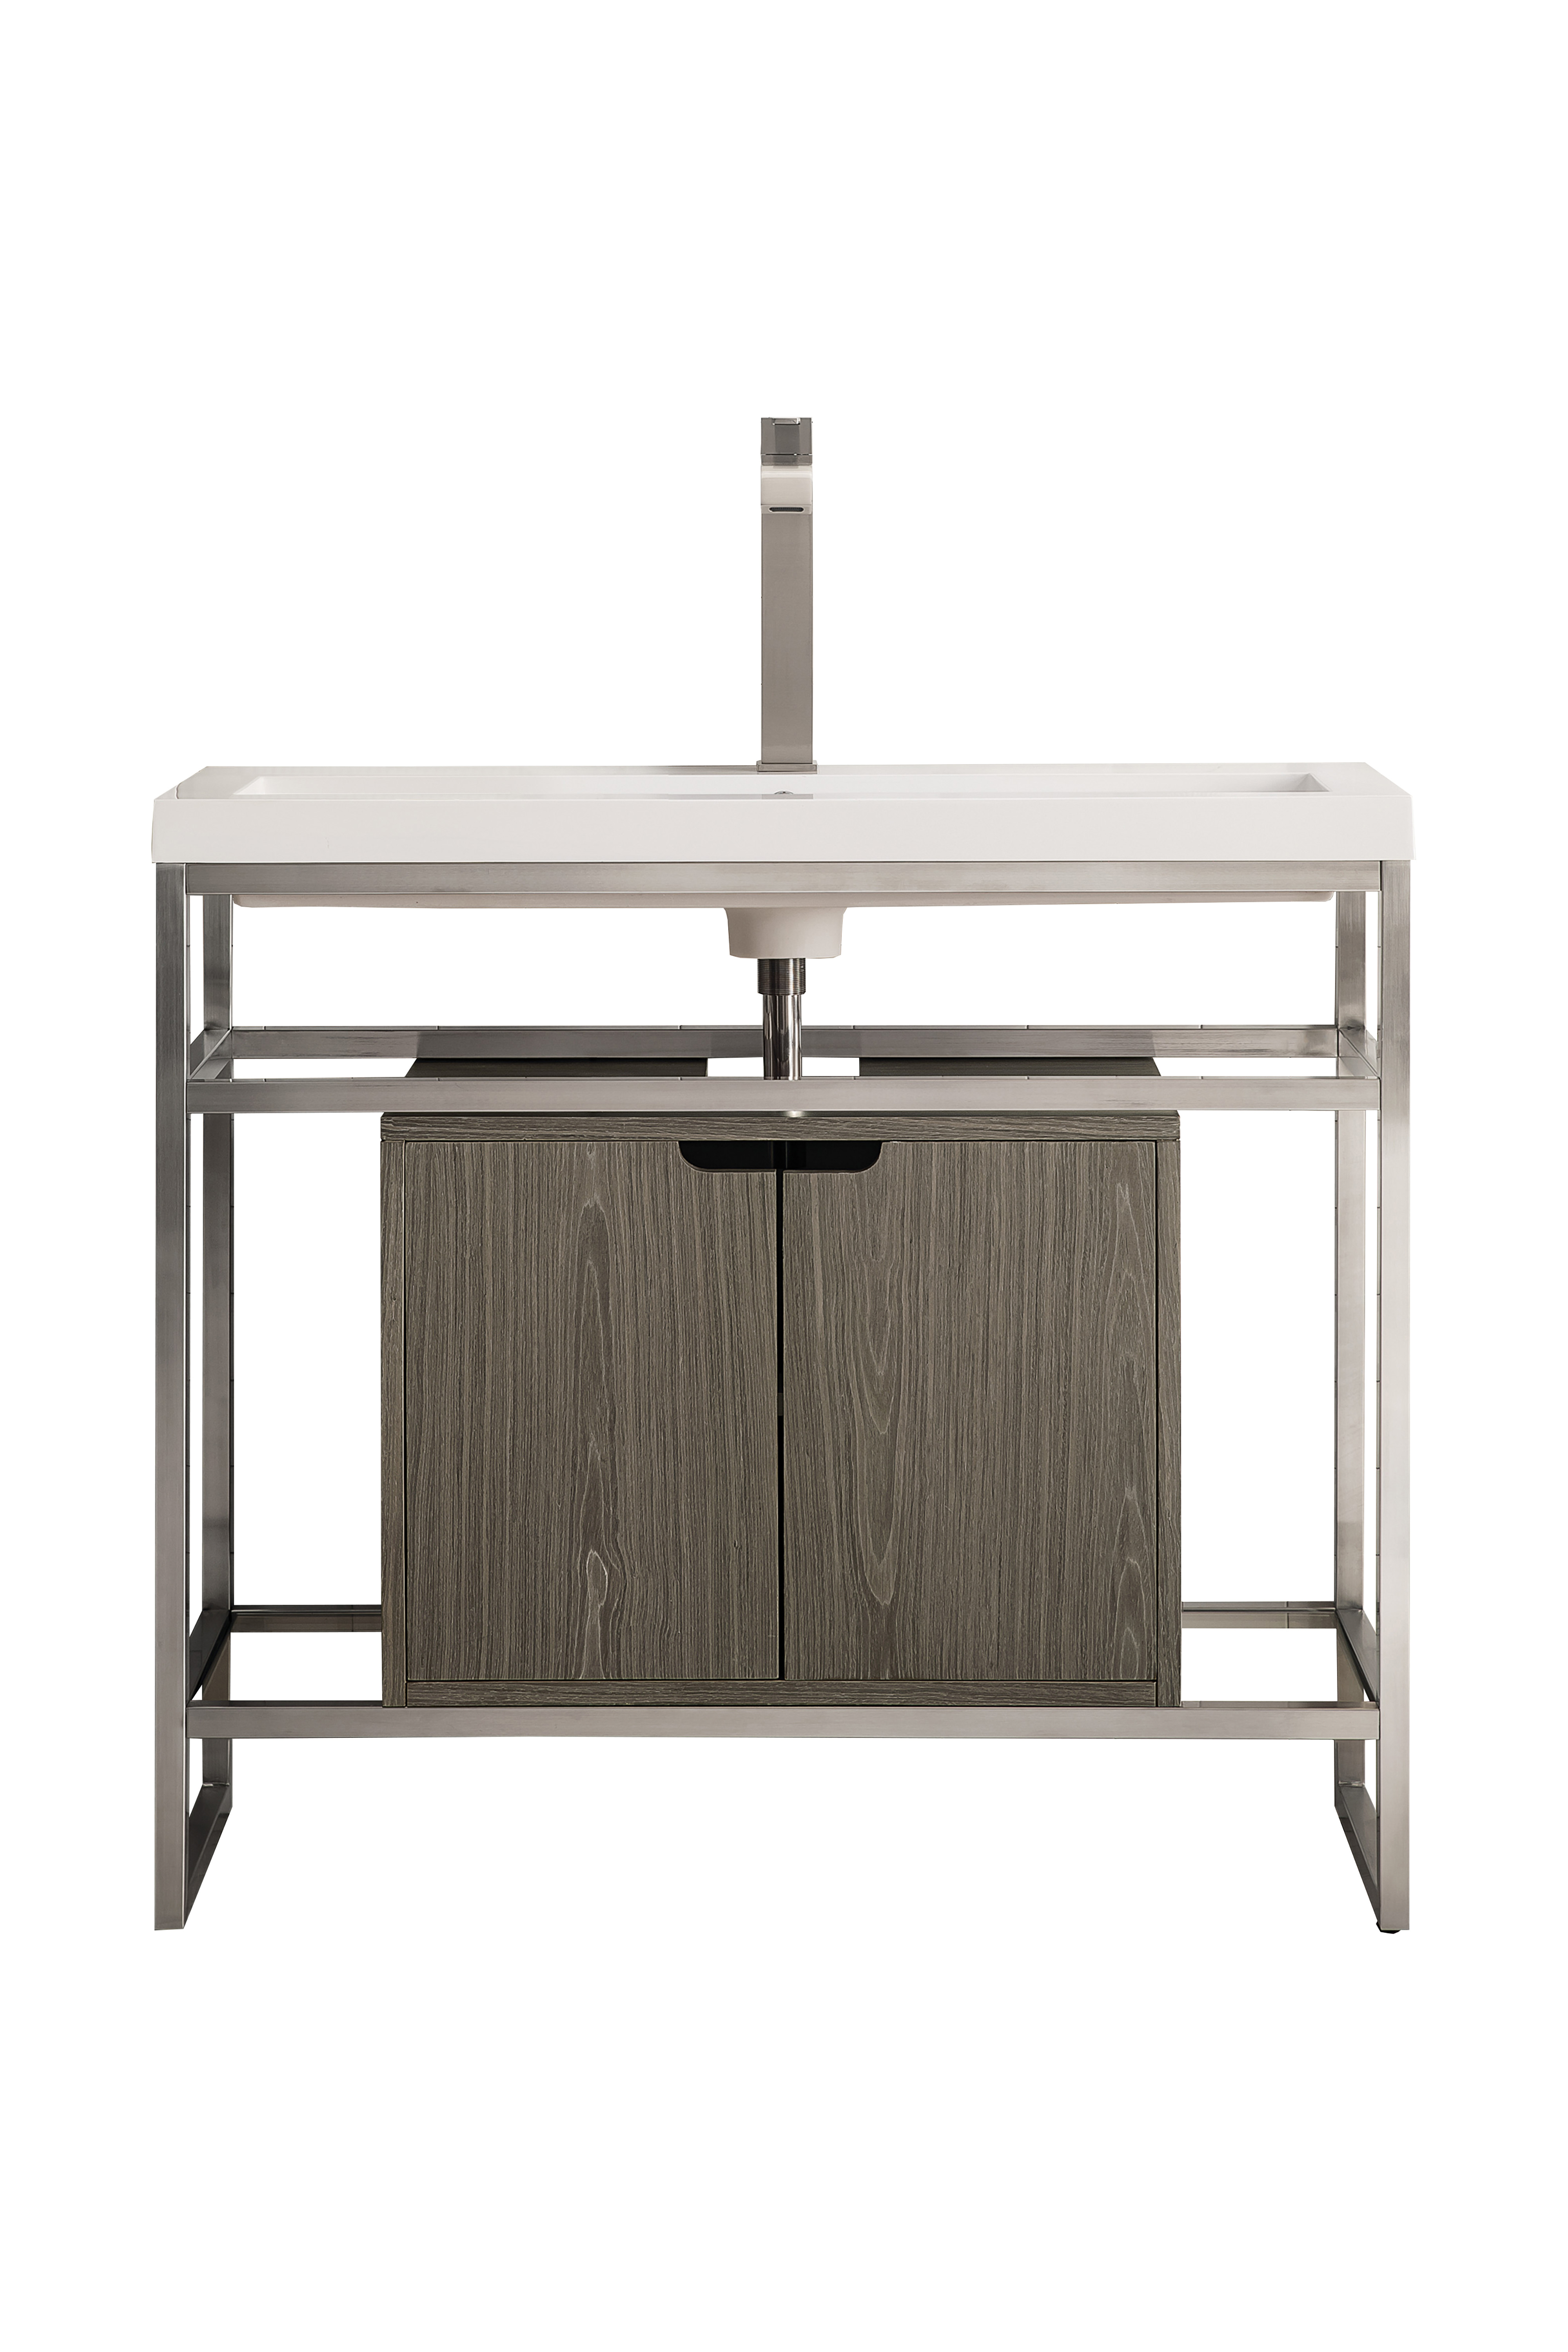 James Martin C105V39.5BNKSCAGRWG Boston 39.5" Stainless Steel Sink Console, Brushed Nickel w/ Ash Gray Storage Cabinet, White Glossy Composite Countertop